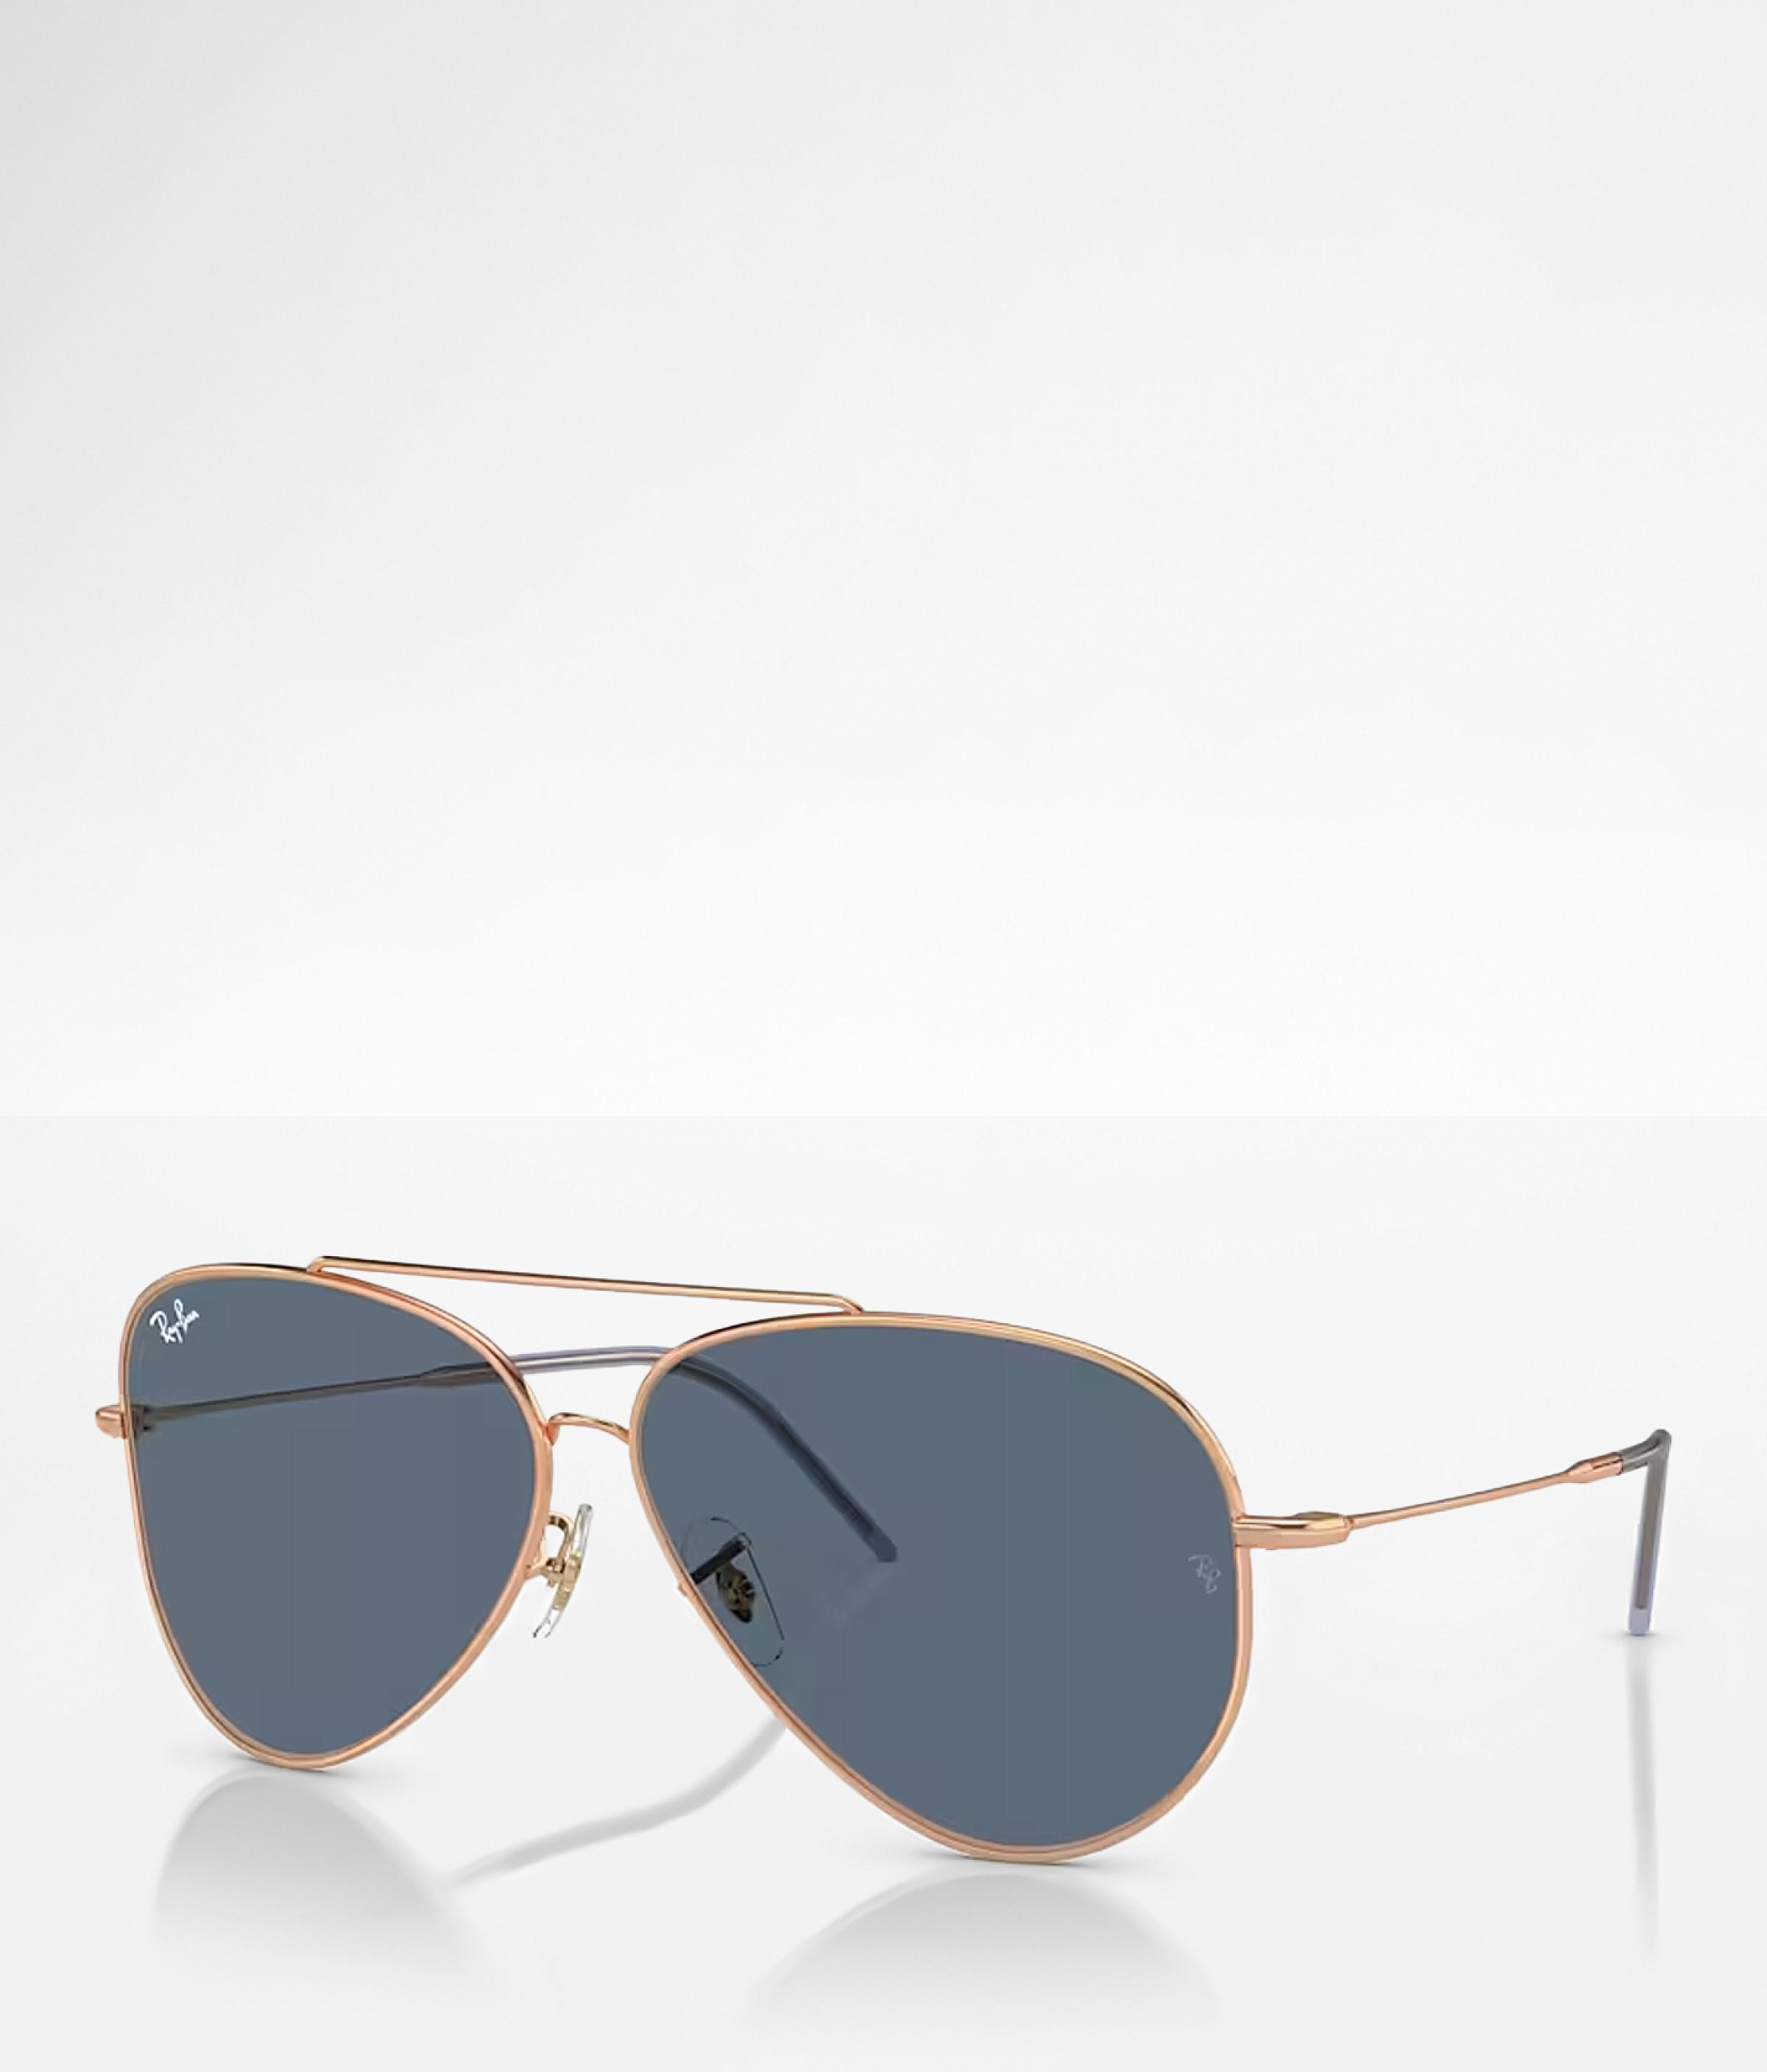 AVIATOR REVERSE Sunglasses in Rose Gold and Blue - RBR0101S